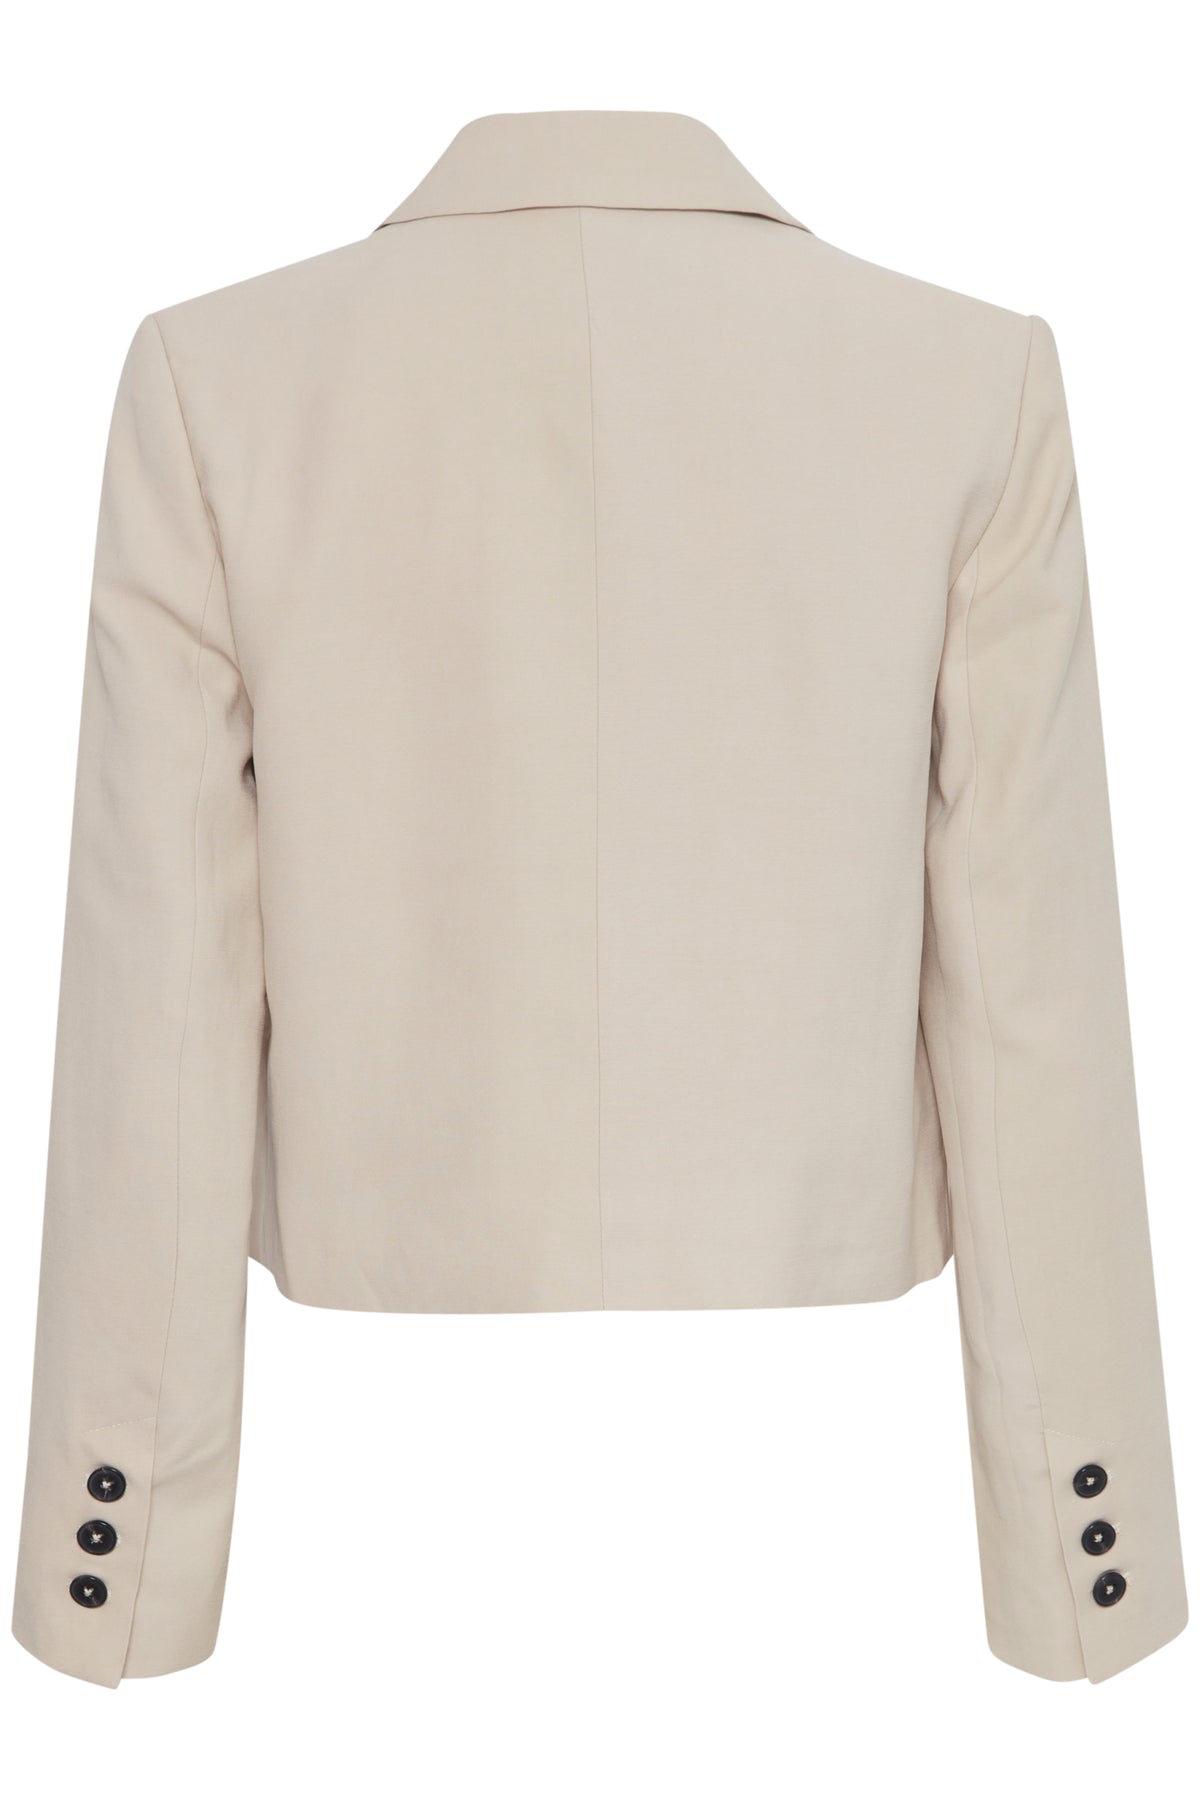 B.Young Bydalano Cement Cropped Blazer